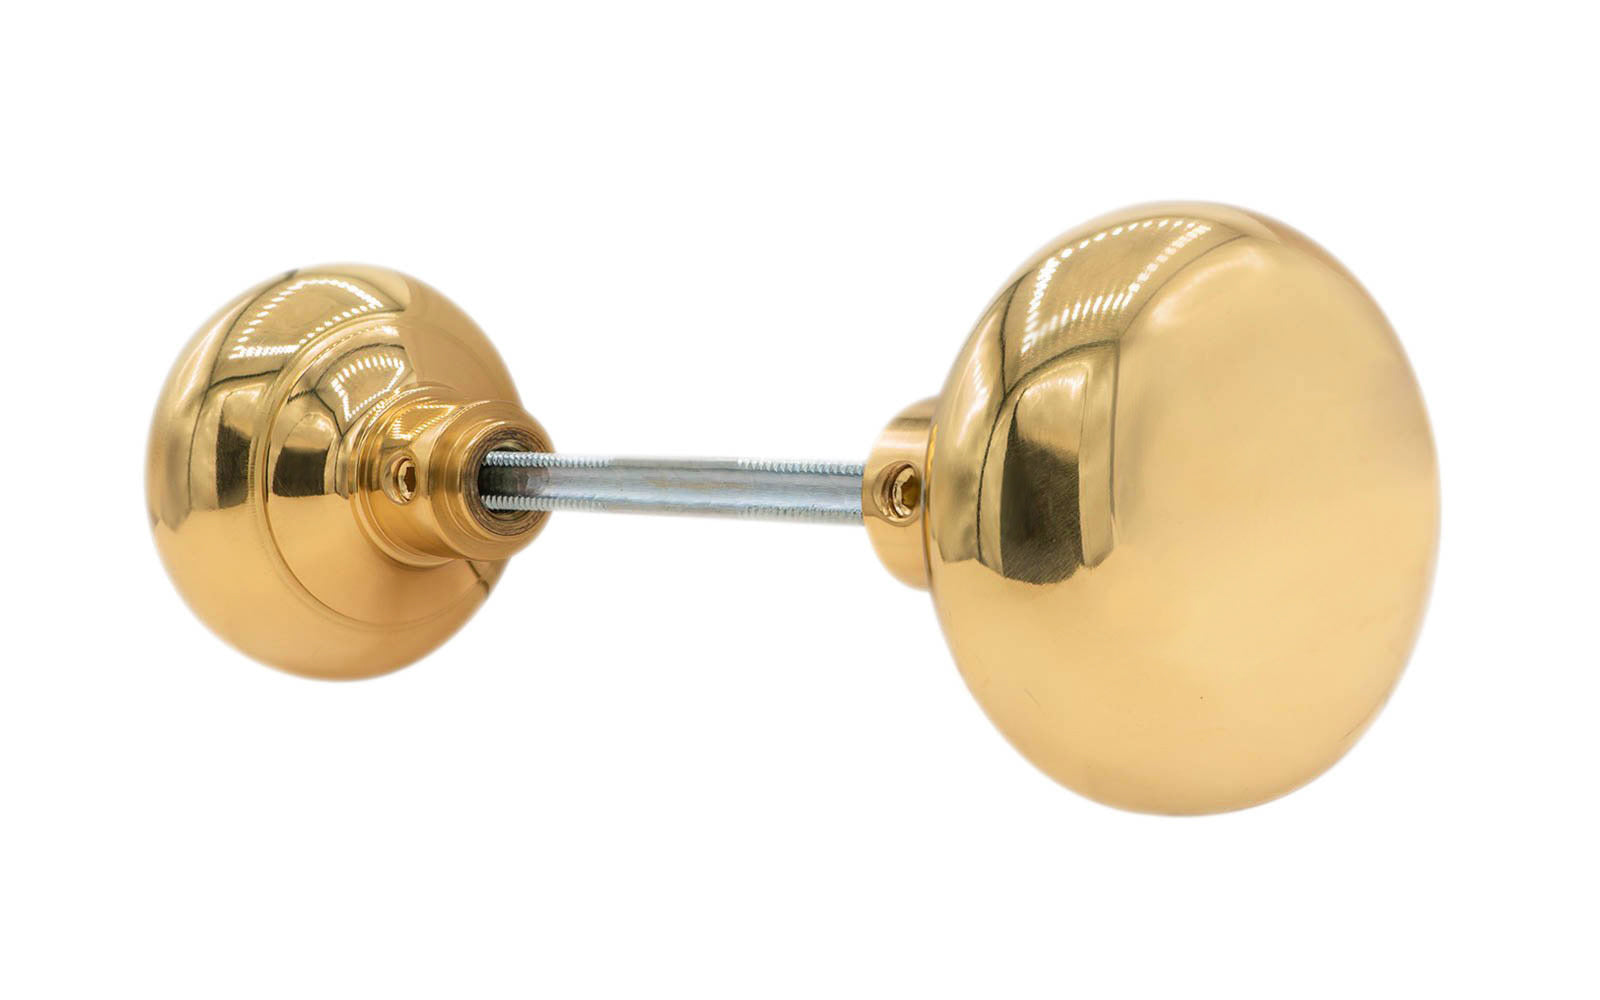 Pair of Traditional & Classic Brass Smooth Design Doorknobs with spindle. Quality hollow core wrought brass doorknobs with an attractive circle-ring design. Reproduction Brass Door Knobs. Traditional Brass Knobs with Spindle. Unlacquered Brass (will patina naturally over time). Non-Lacquered Brass